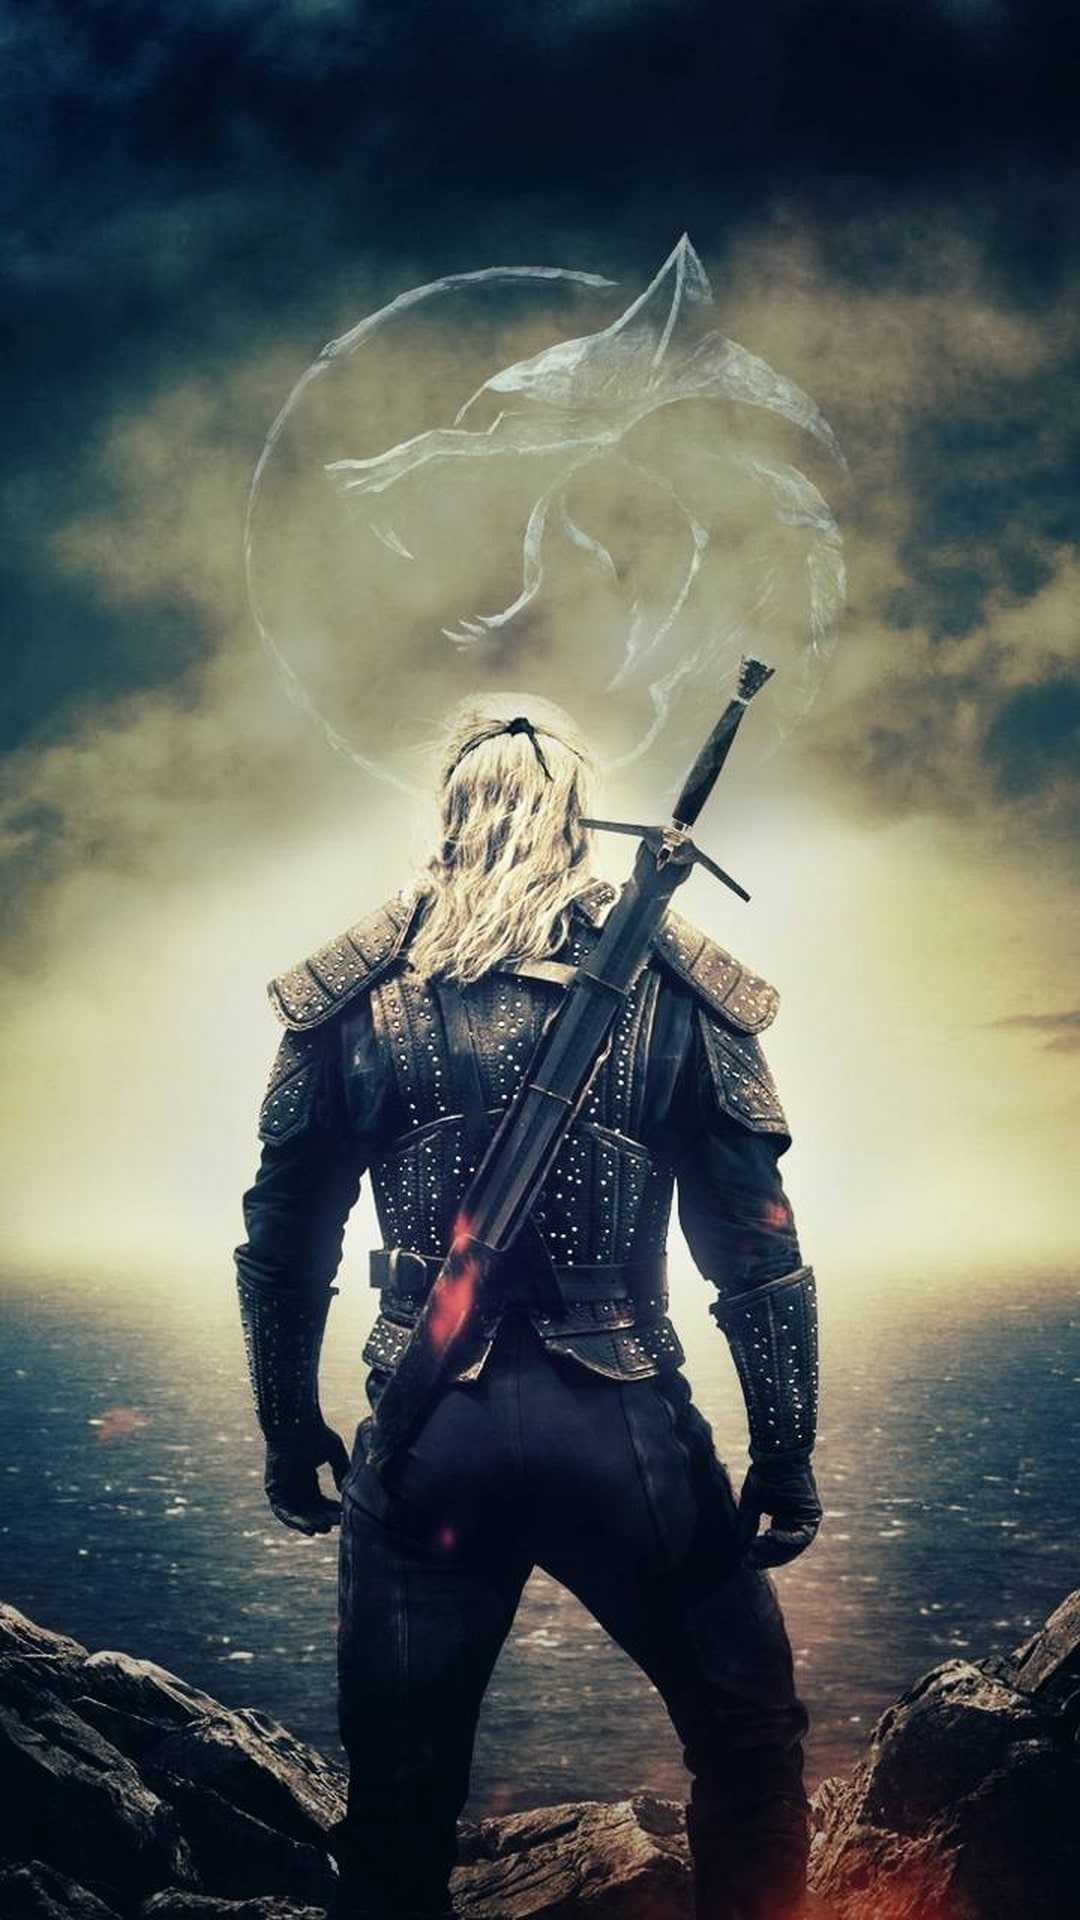 Video wallpaper The Witcher 3 Games